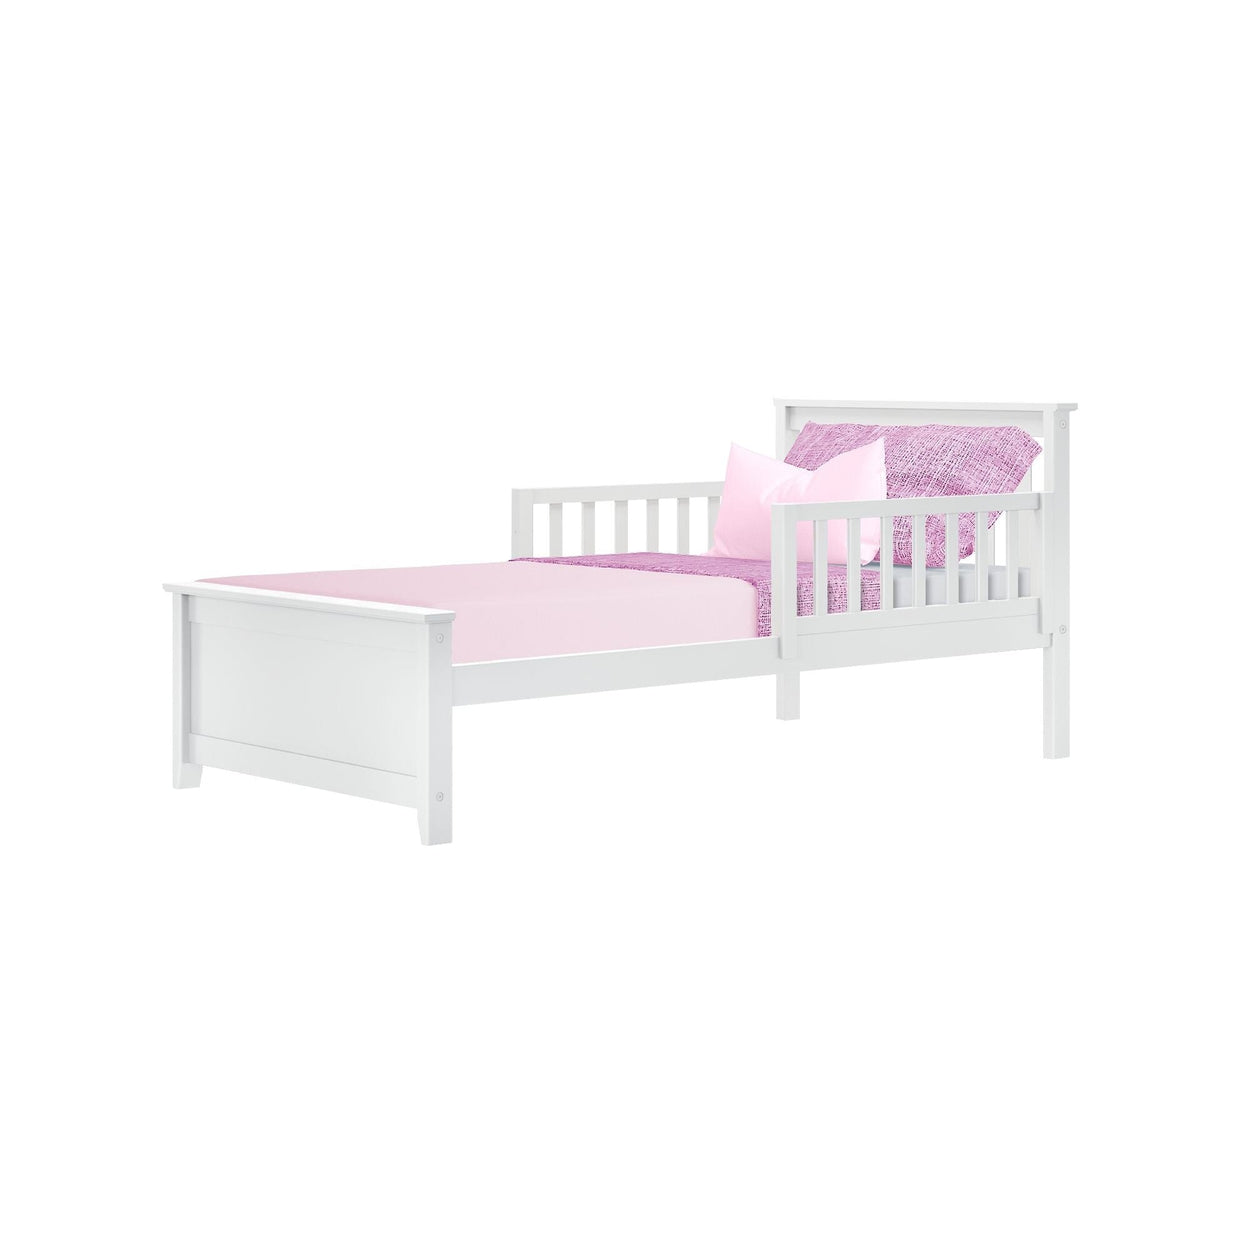 180210002209 : Kids Beds Twin Bed with Two Guard Rails, White